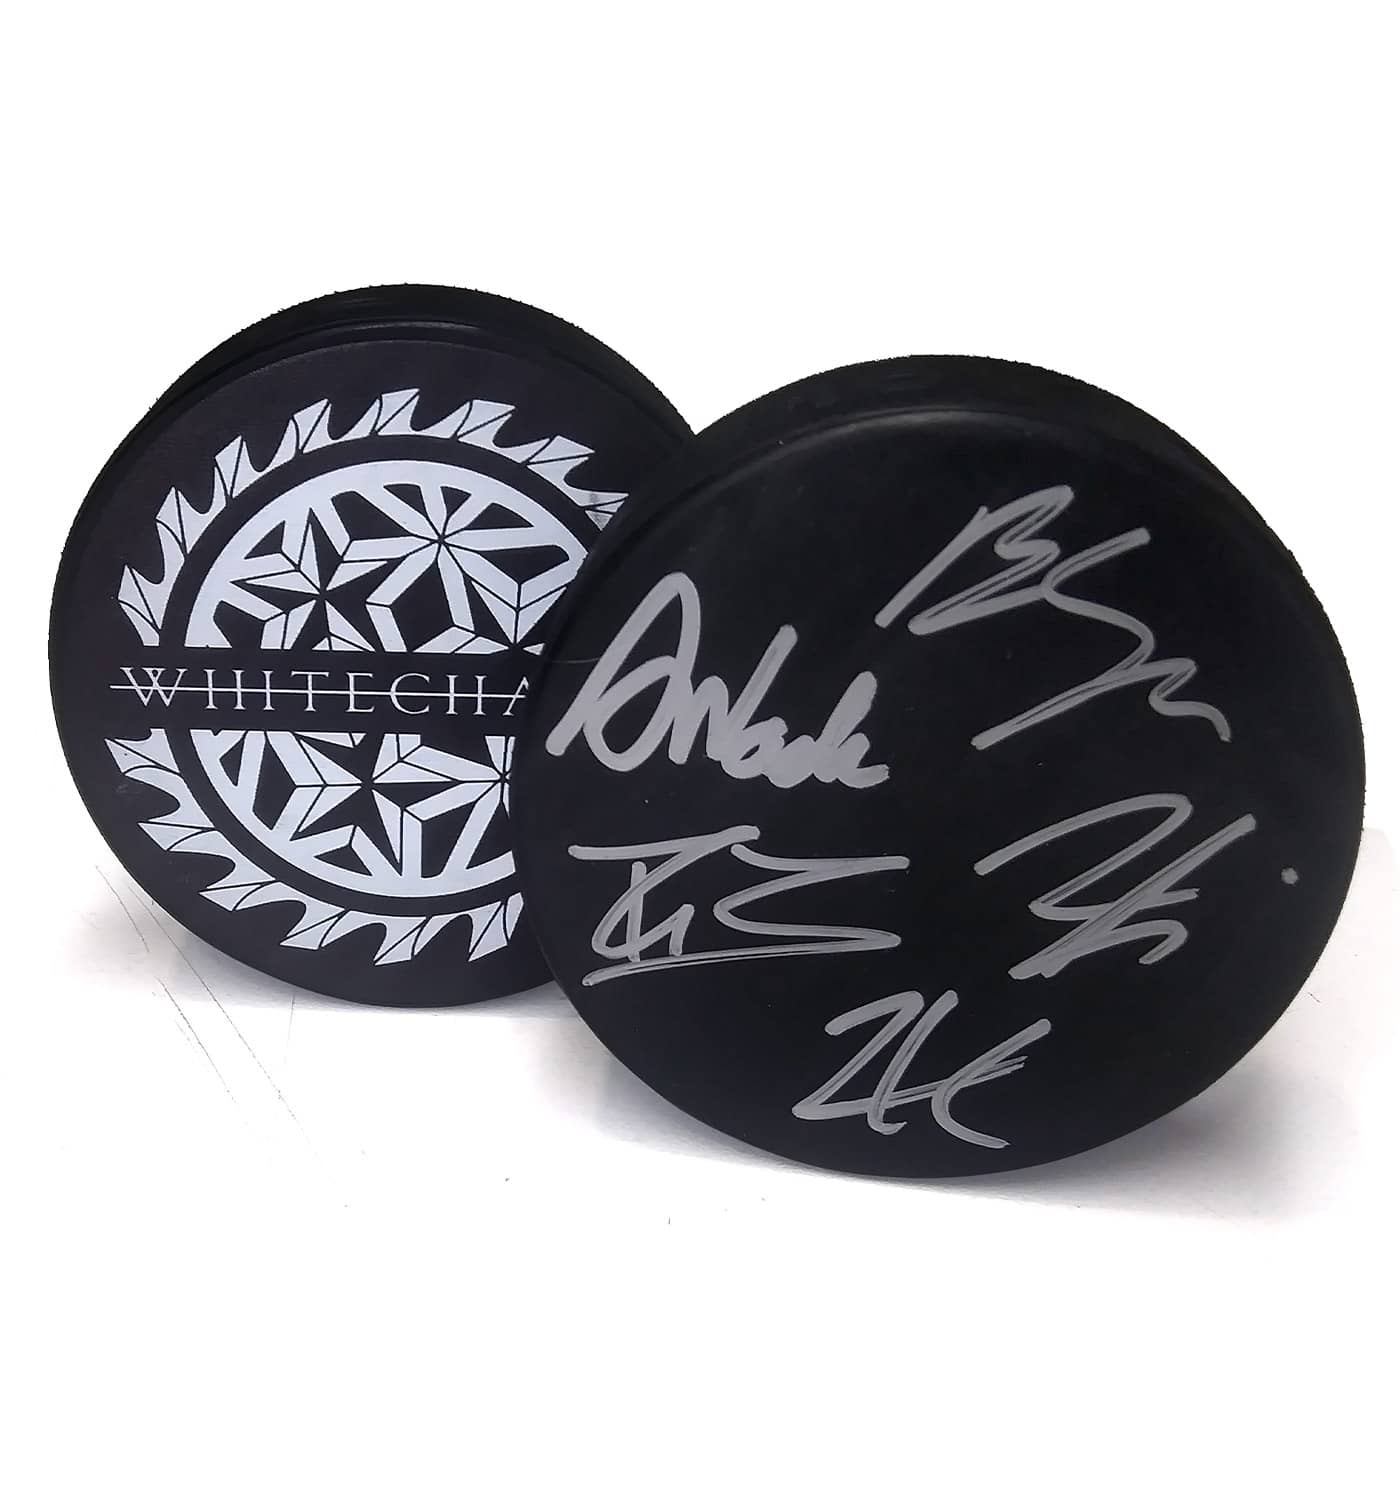 WHITECHAPEL 'MARK OF THE SKATE BLADE' limited edition autographed hockey puck